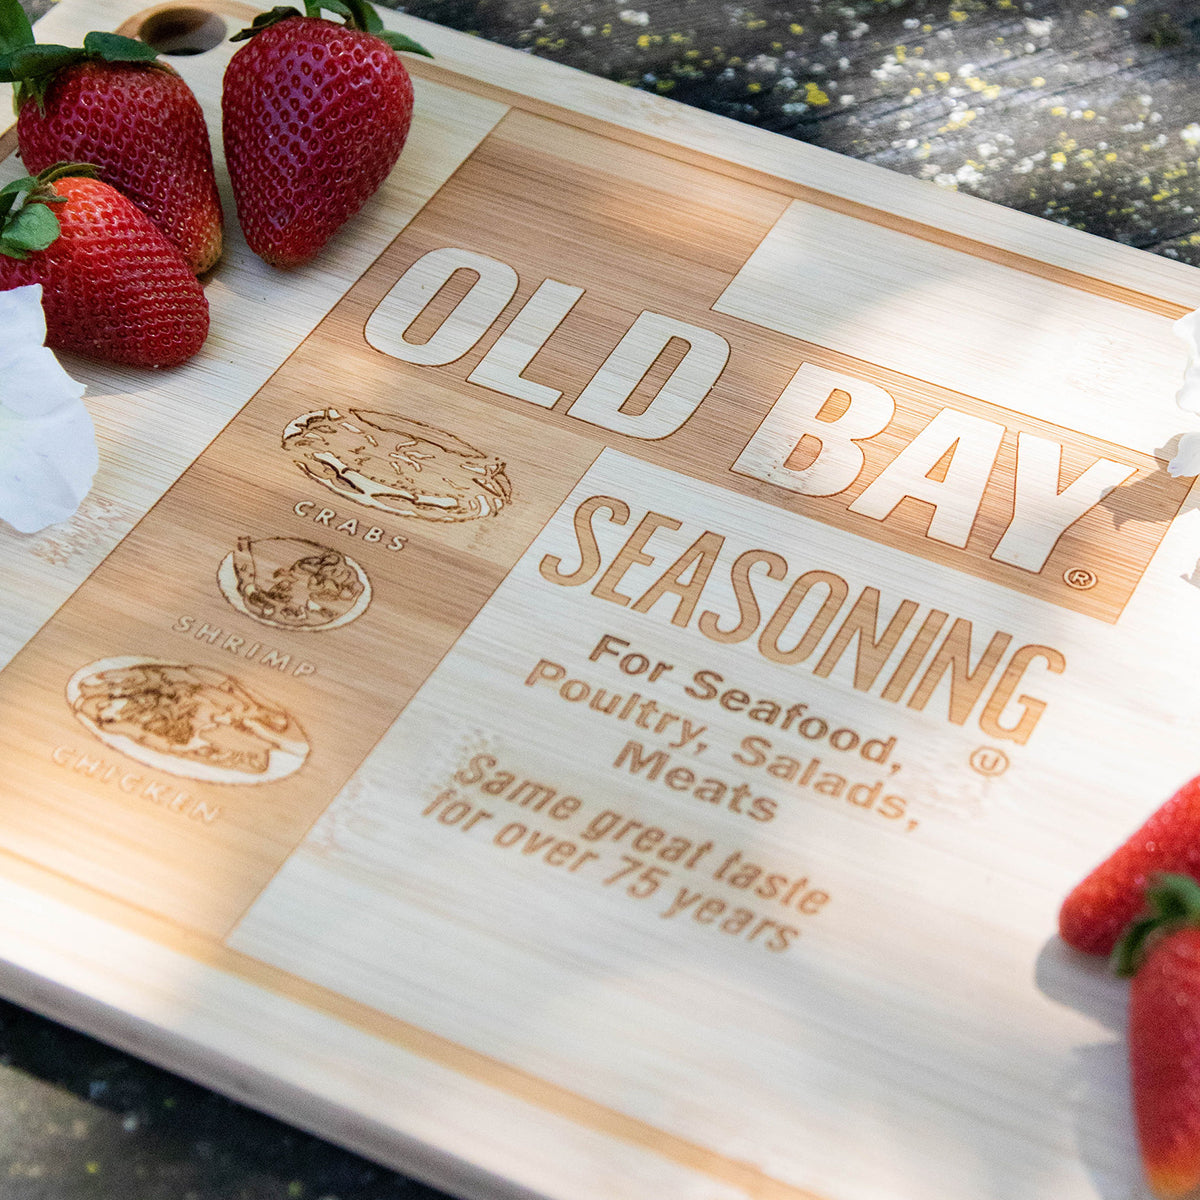 OLD BAY / Bamboo Cutting Board - Route One Apparel